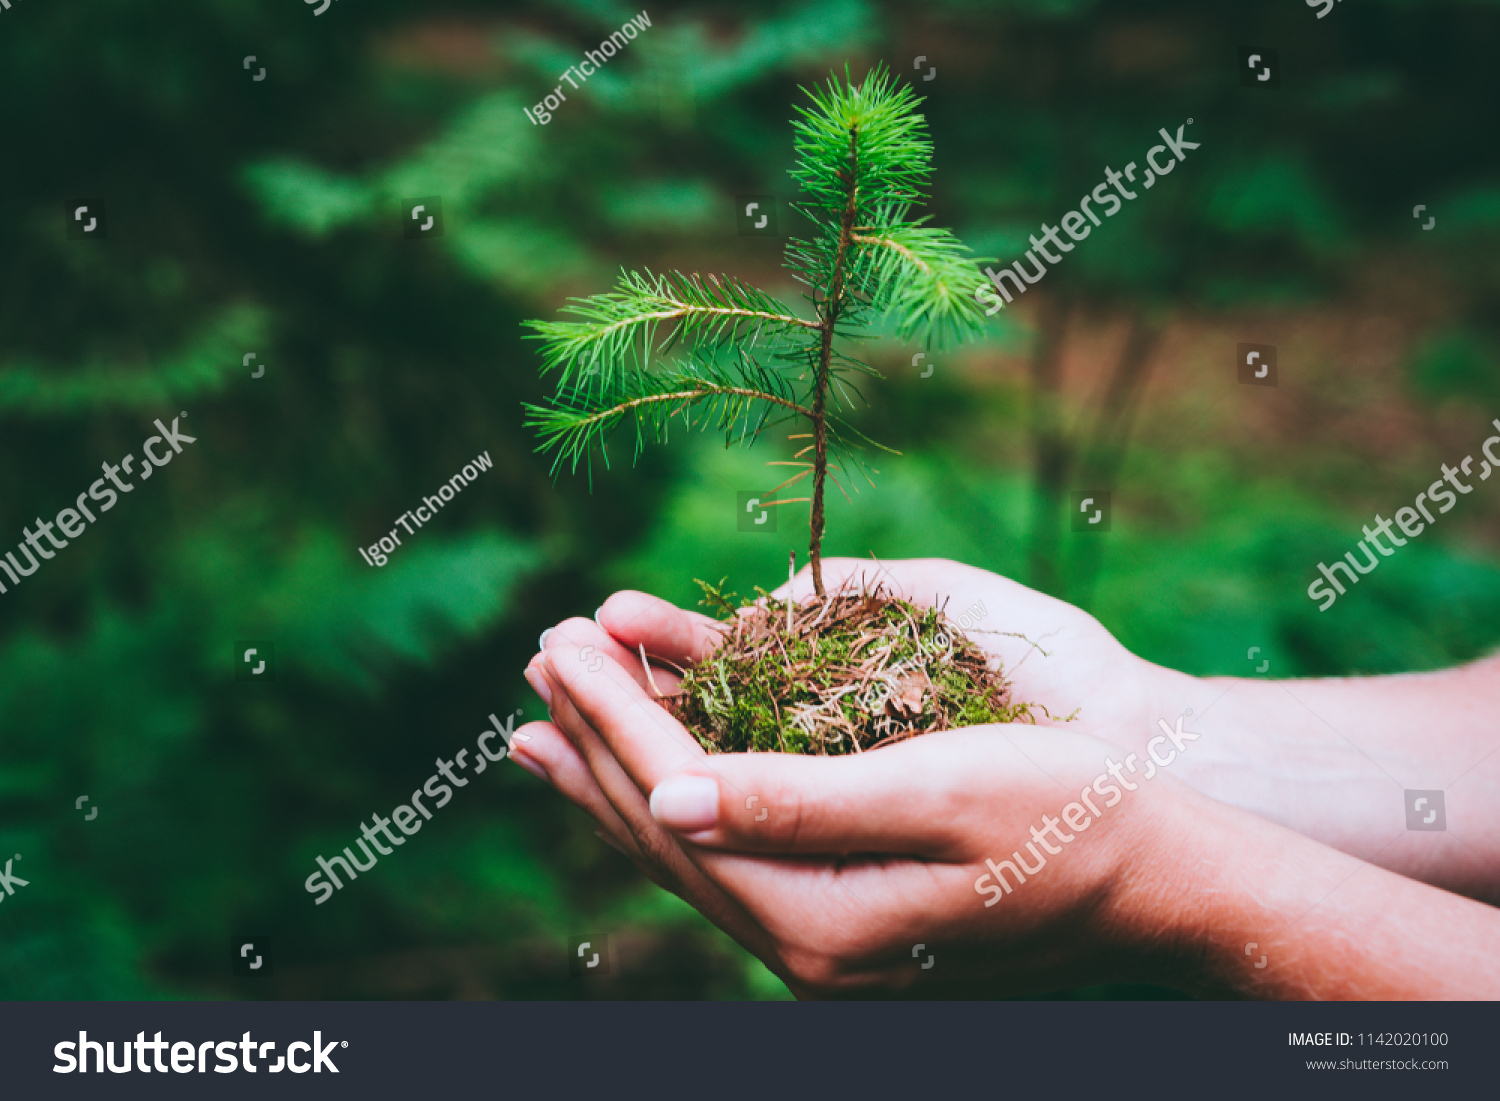 Female hand holding sprout wilde pine tree in nature green forest. Earth Day save environment concept. Growing seedling forester planting #1142020100